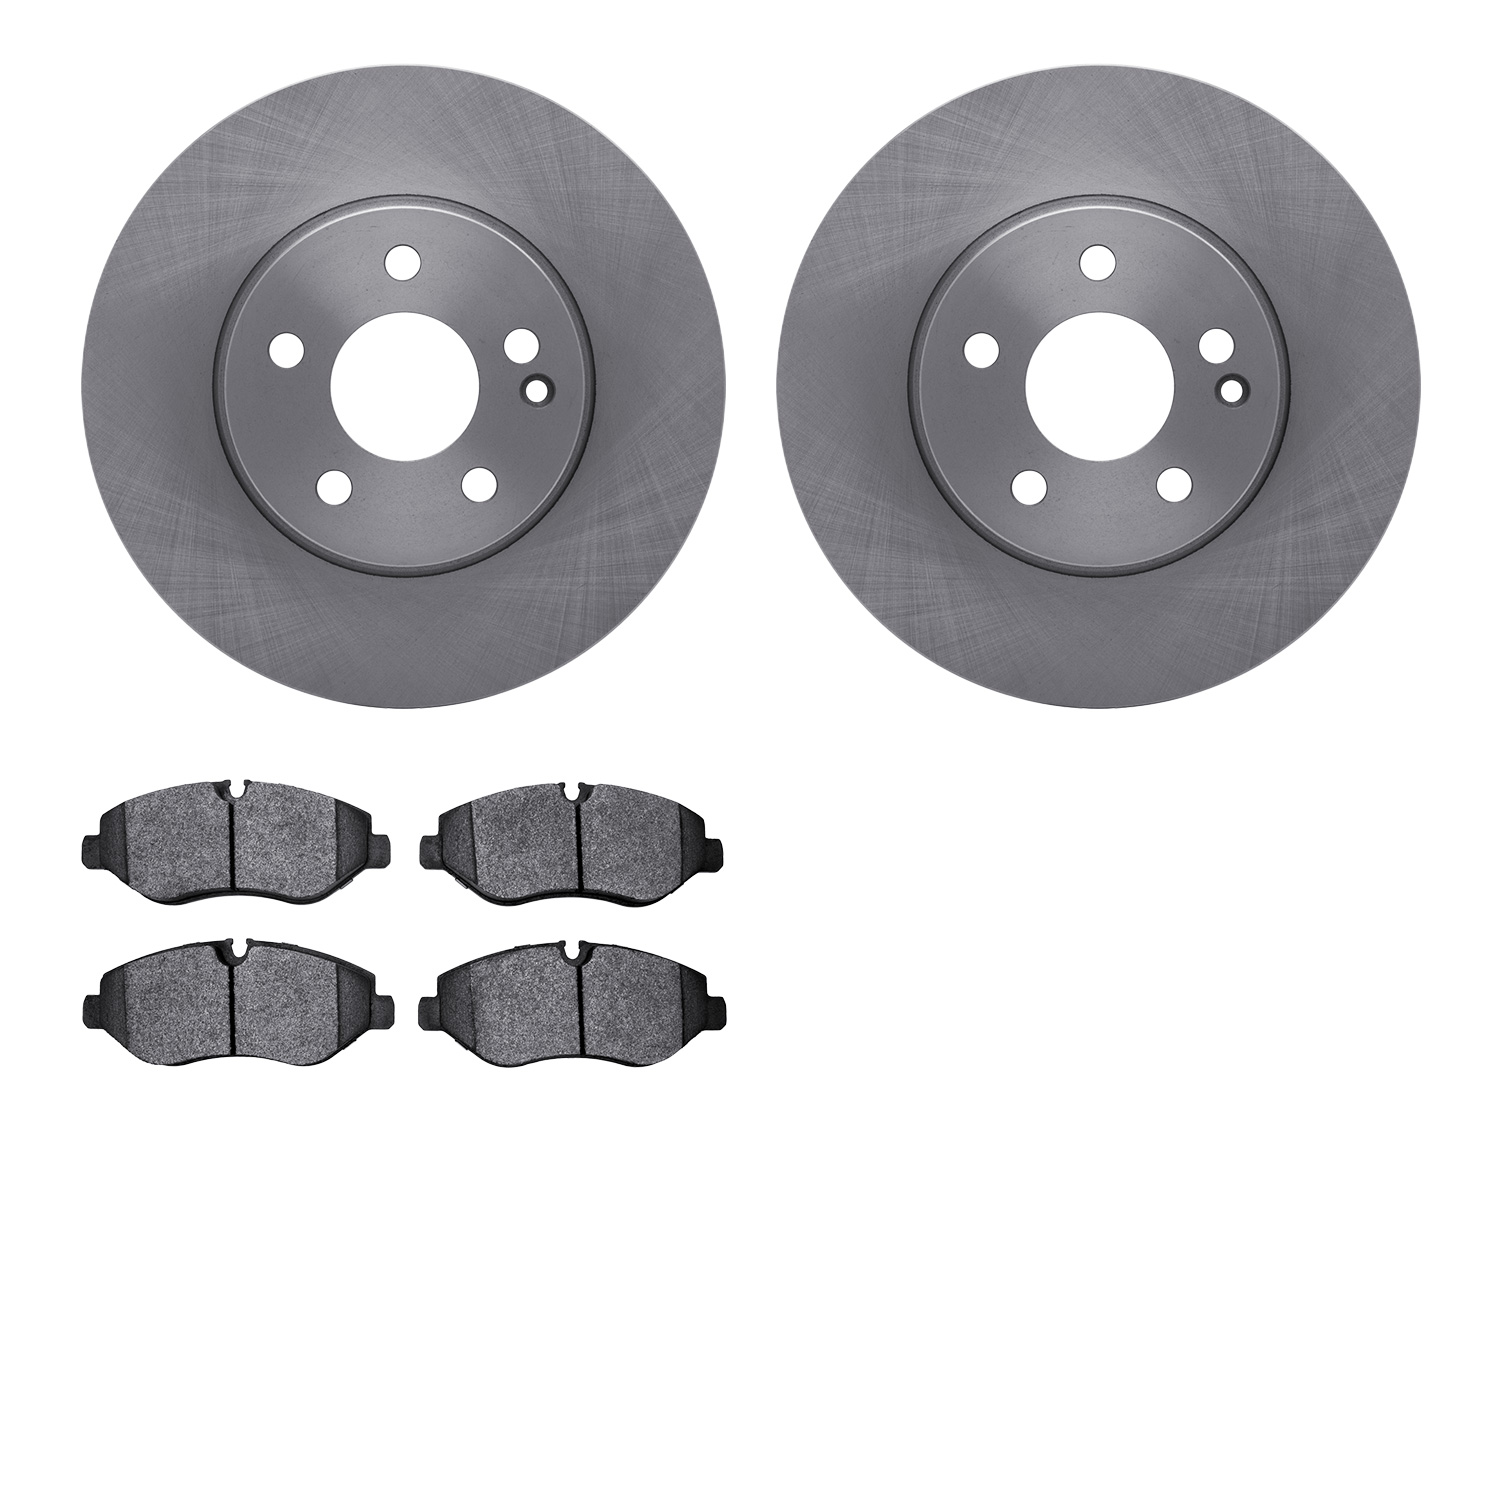 6202-63536 Brake Rotors w/Heavy-Duty Brake Pads Kit, Fits Select Mercedes-Benz, Position: Front